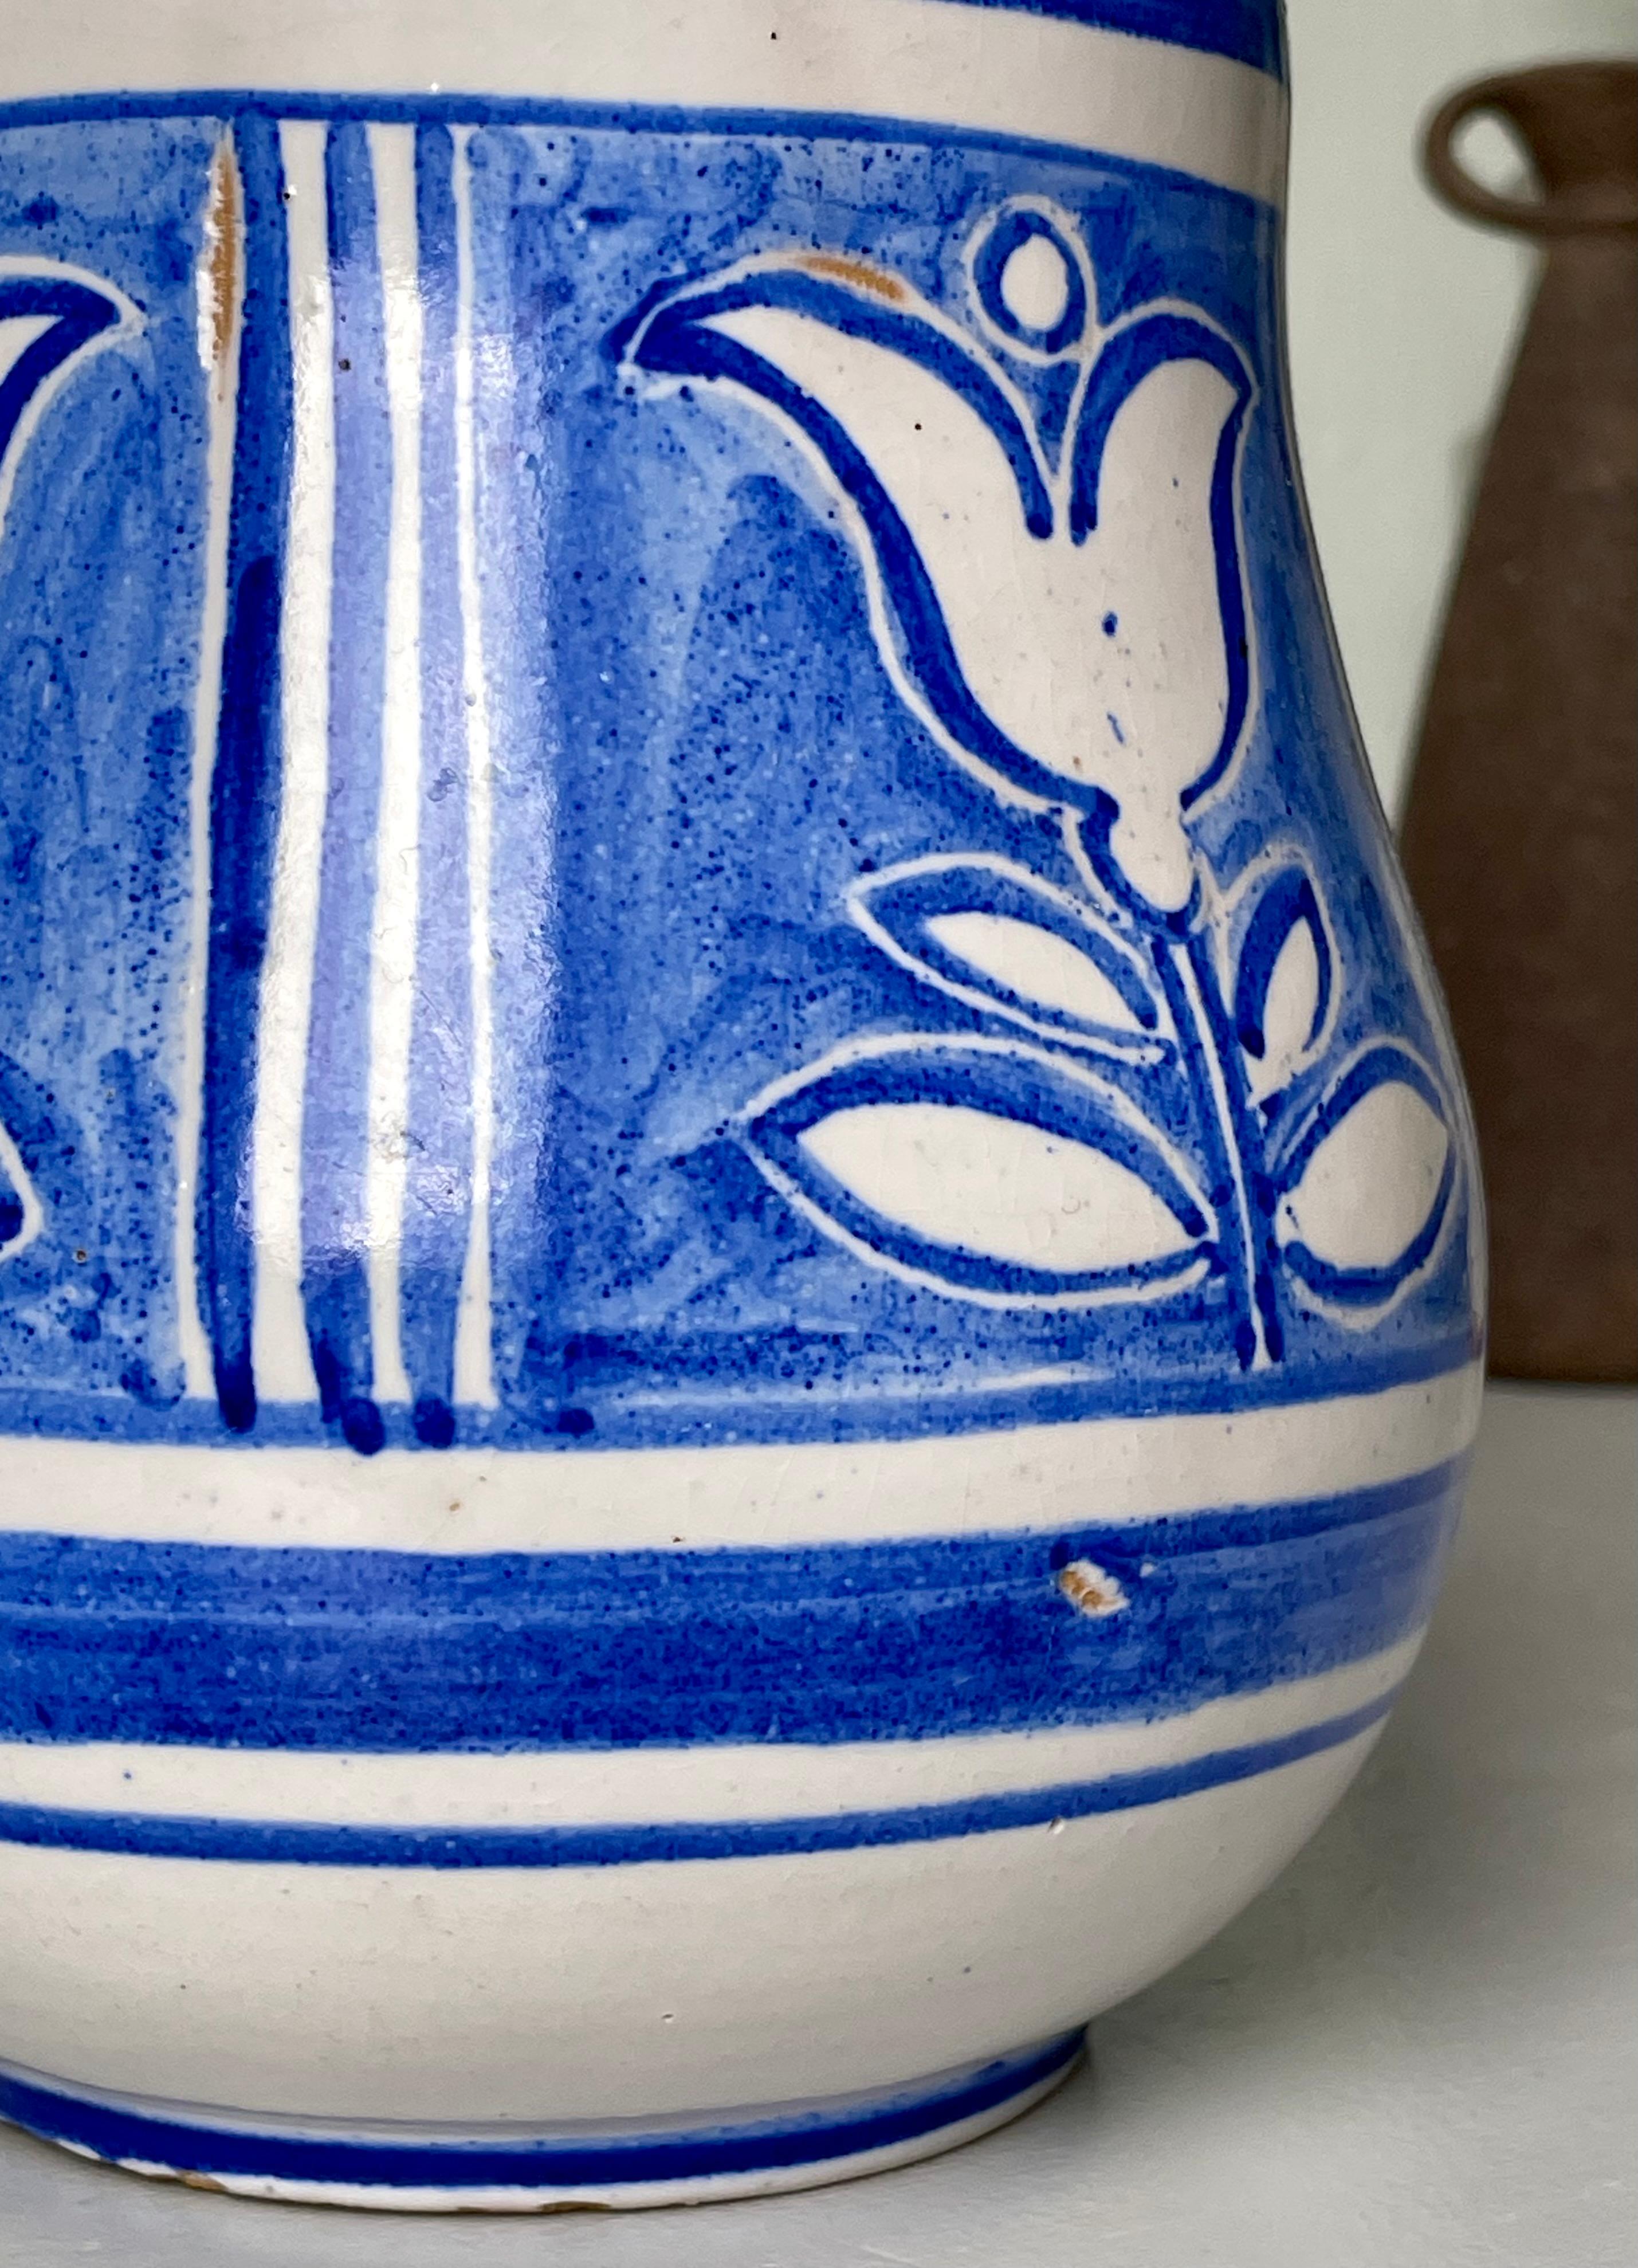 Nordic White Hand-Decorated Blue Floral Ceramic Vase, 1950s For Sale 6